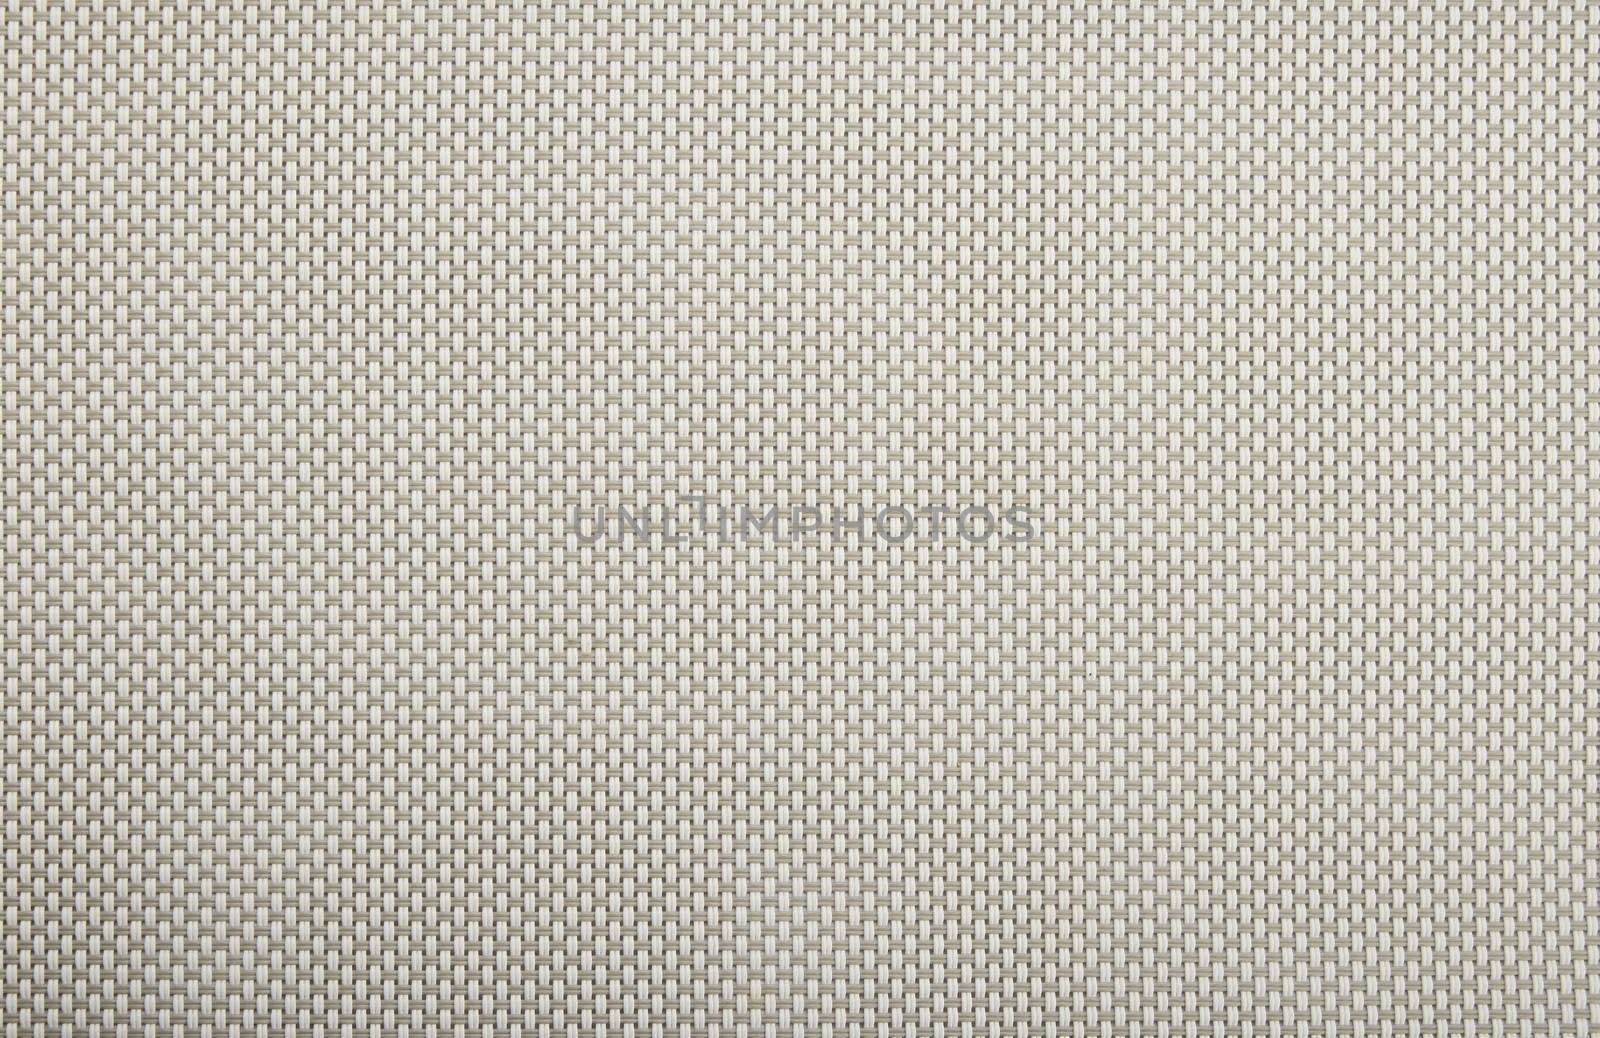 Background texture of horizontal gray and vertical white wicker  by BreakingTheWalls